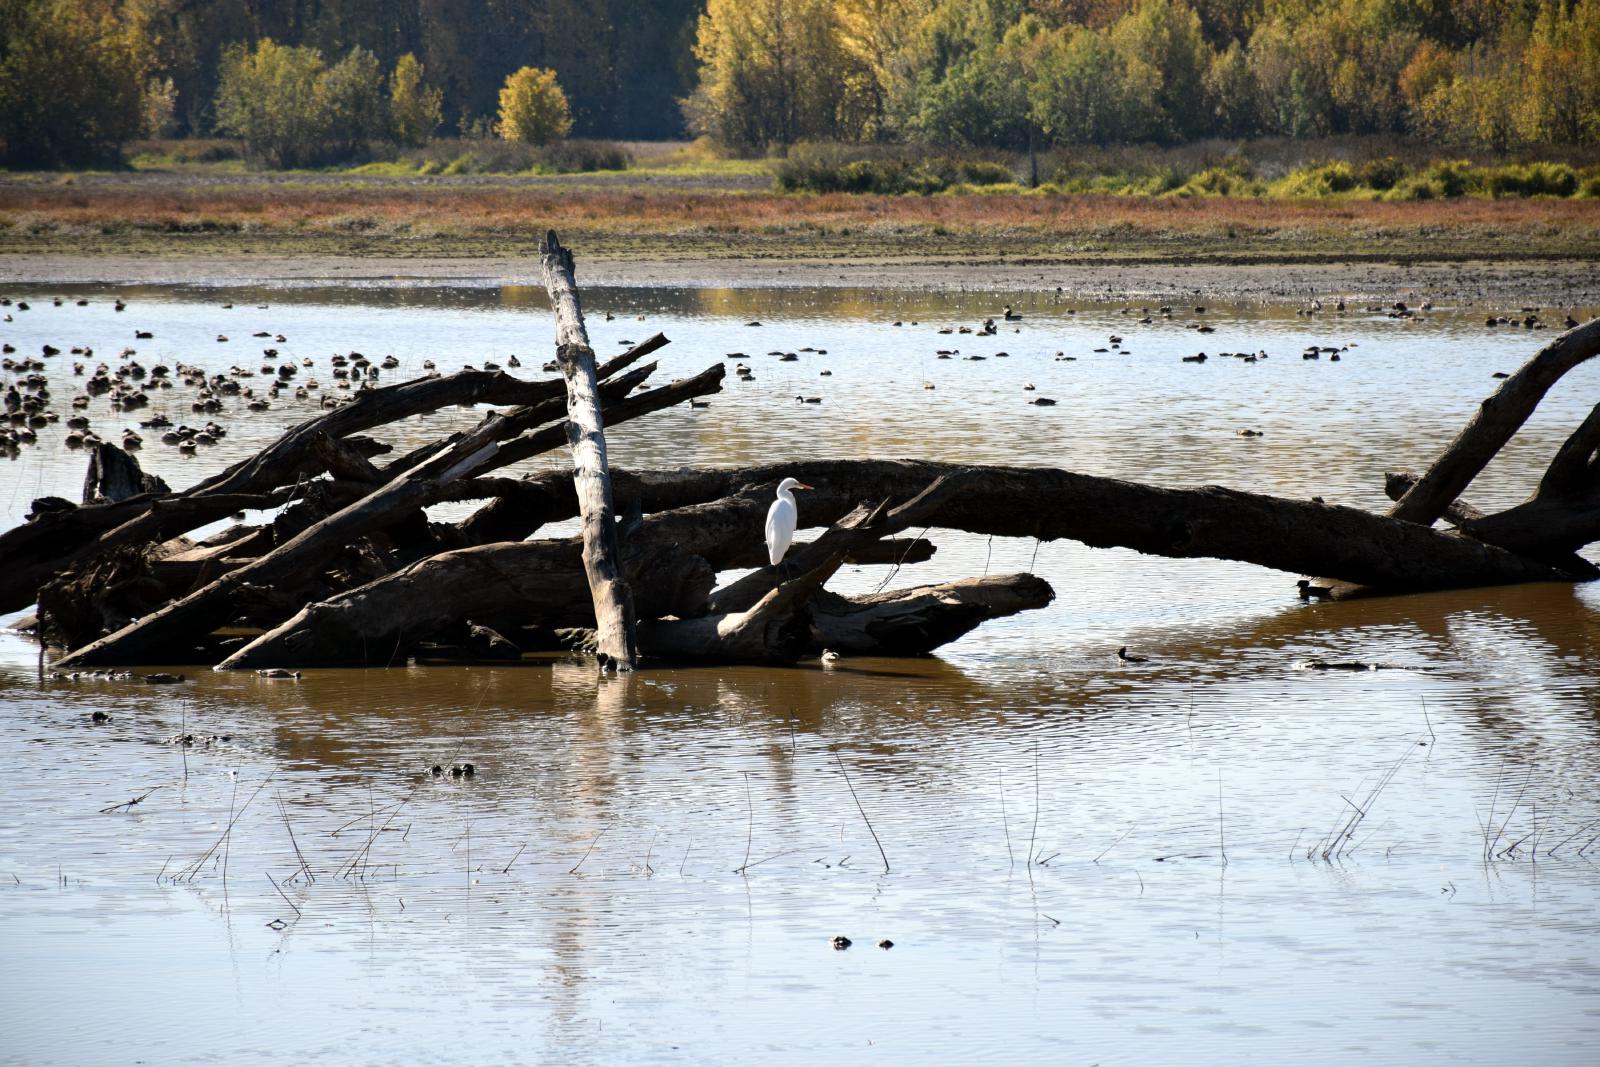 Logs and birds in the middle of the swamp